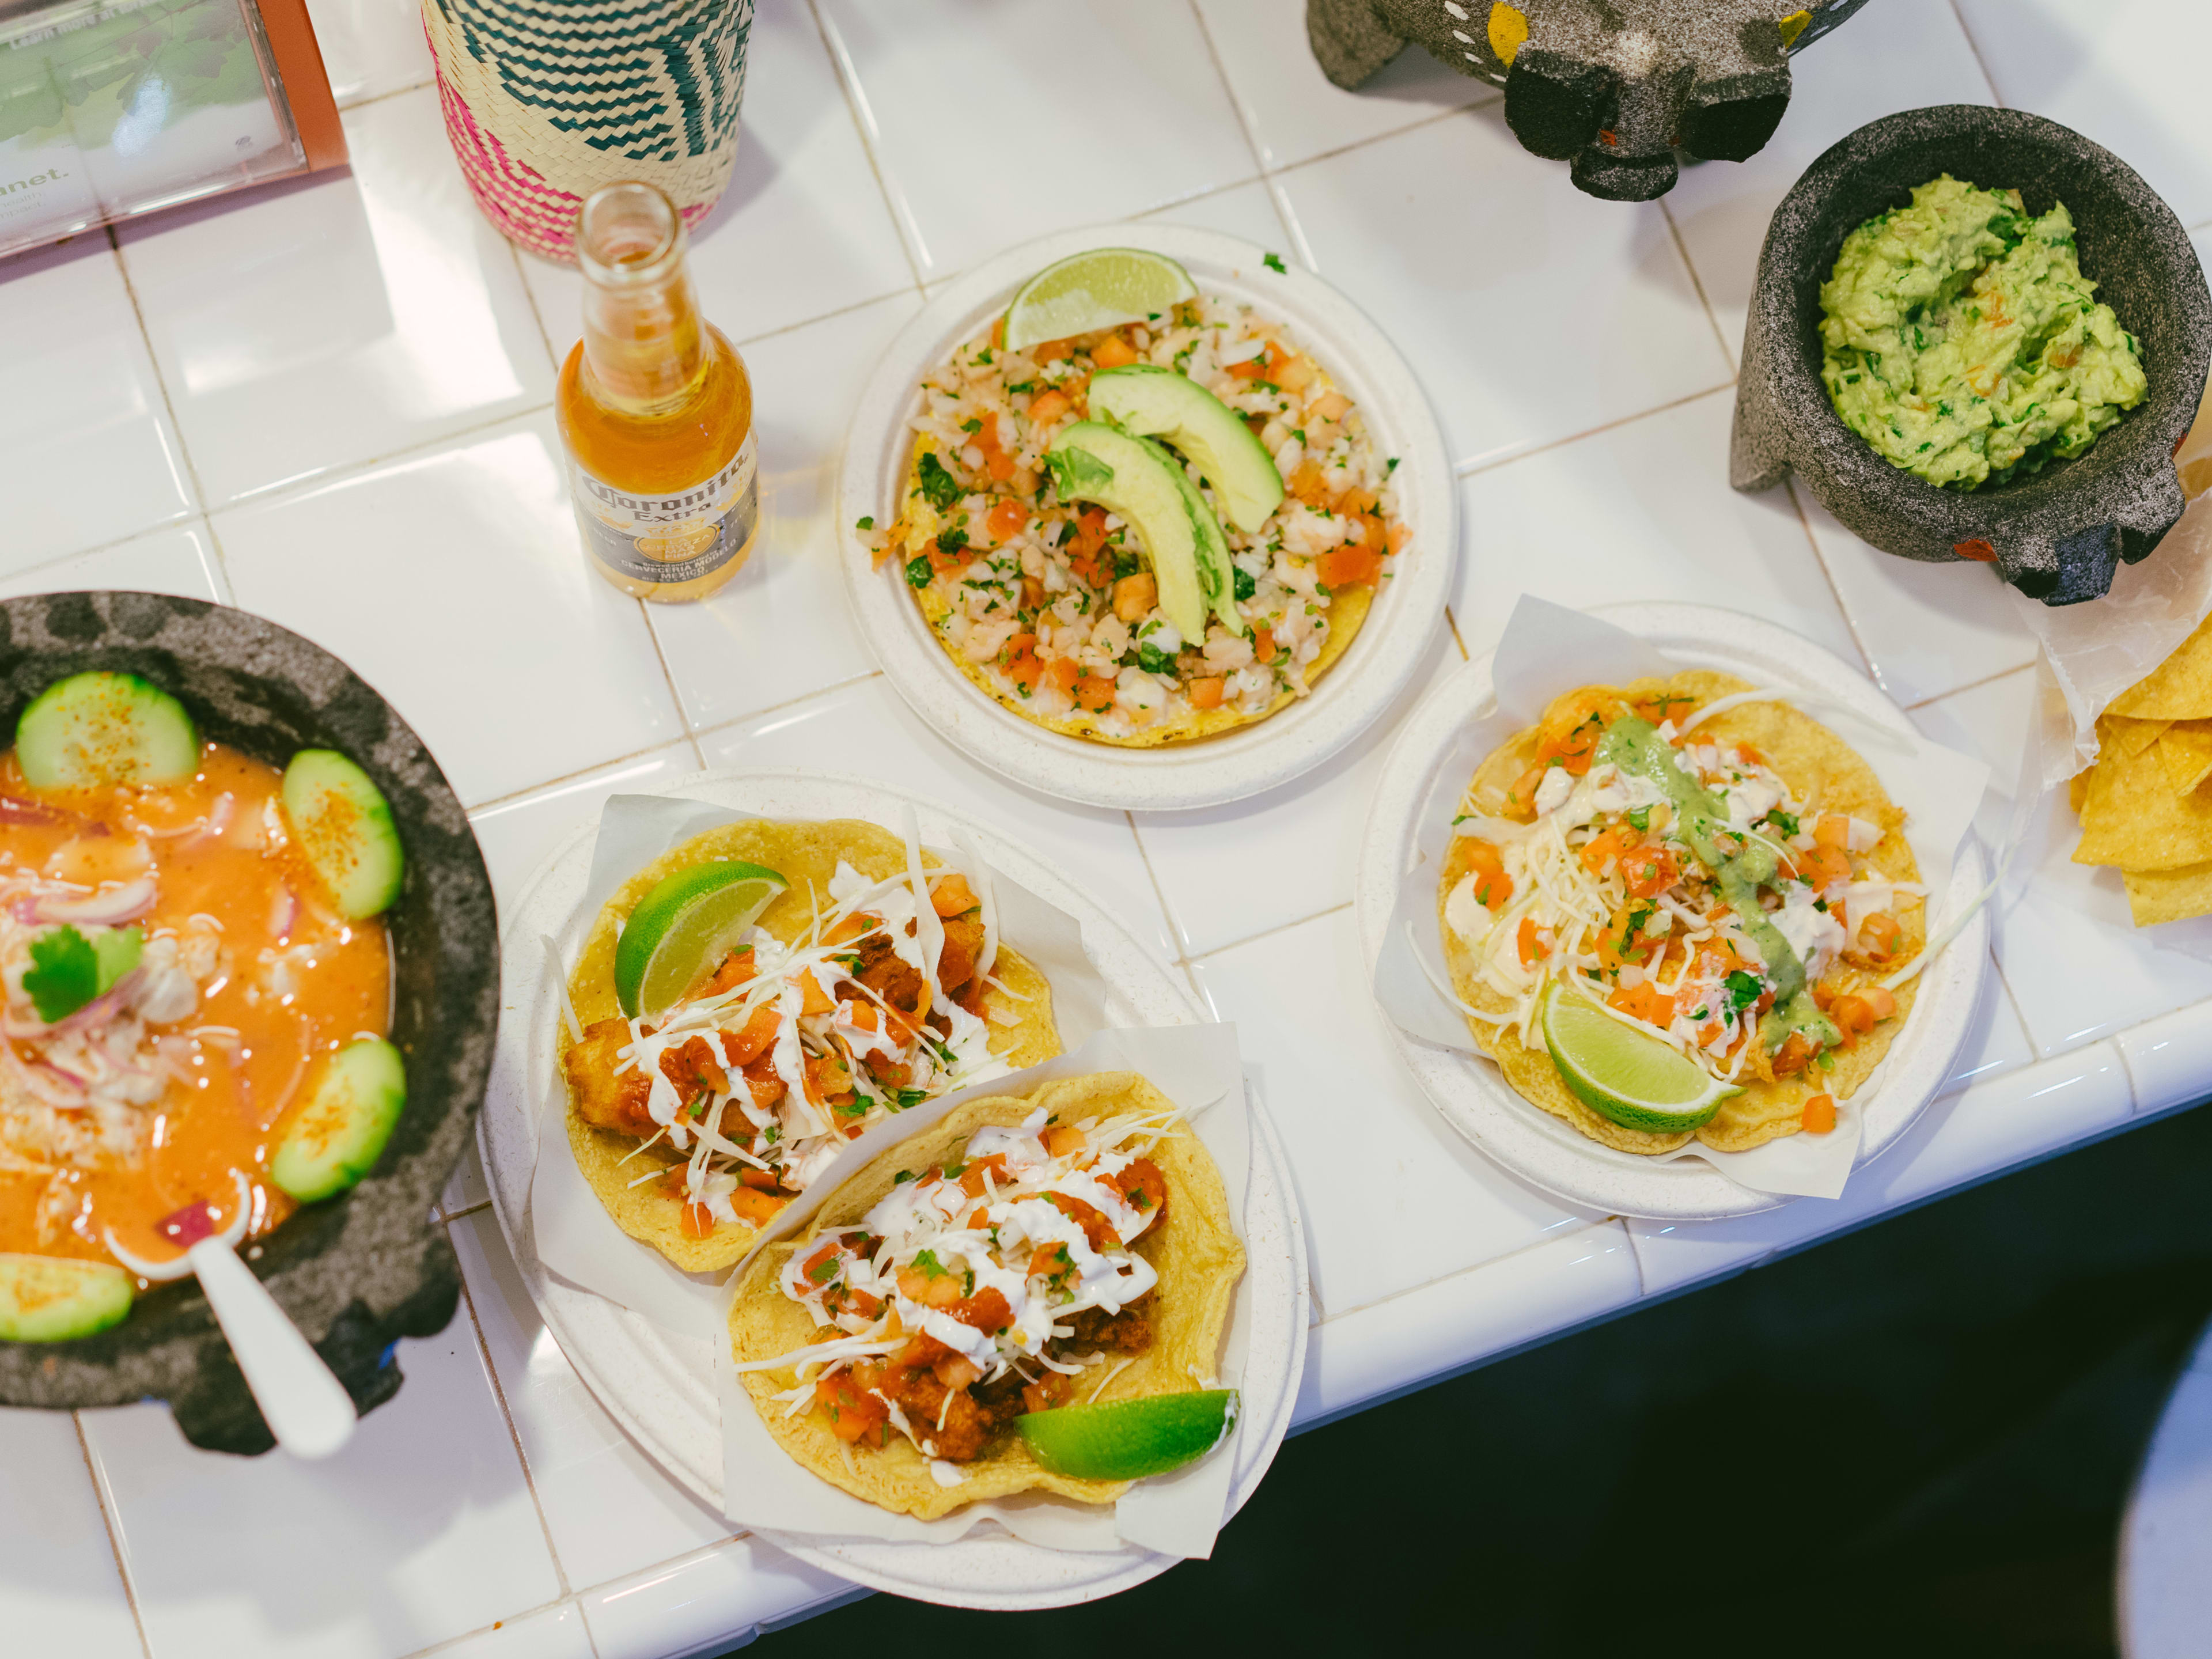 A spread of seafood tacos and tostadas, with a big serving of aguachile to the side.